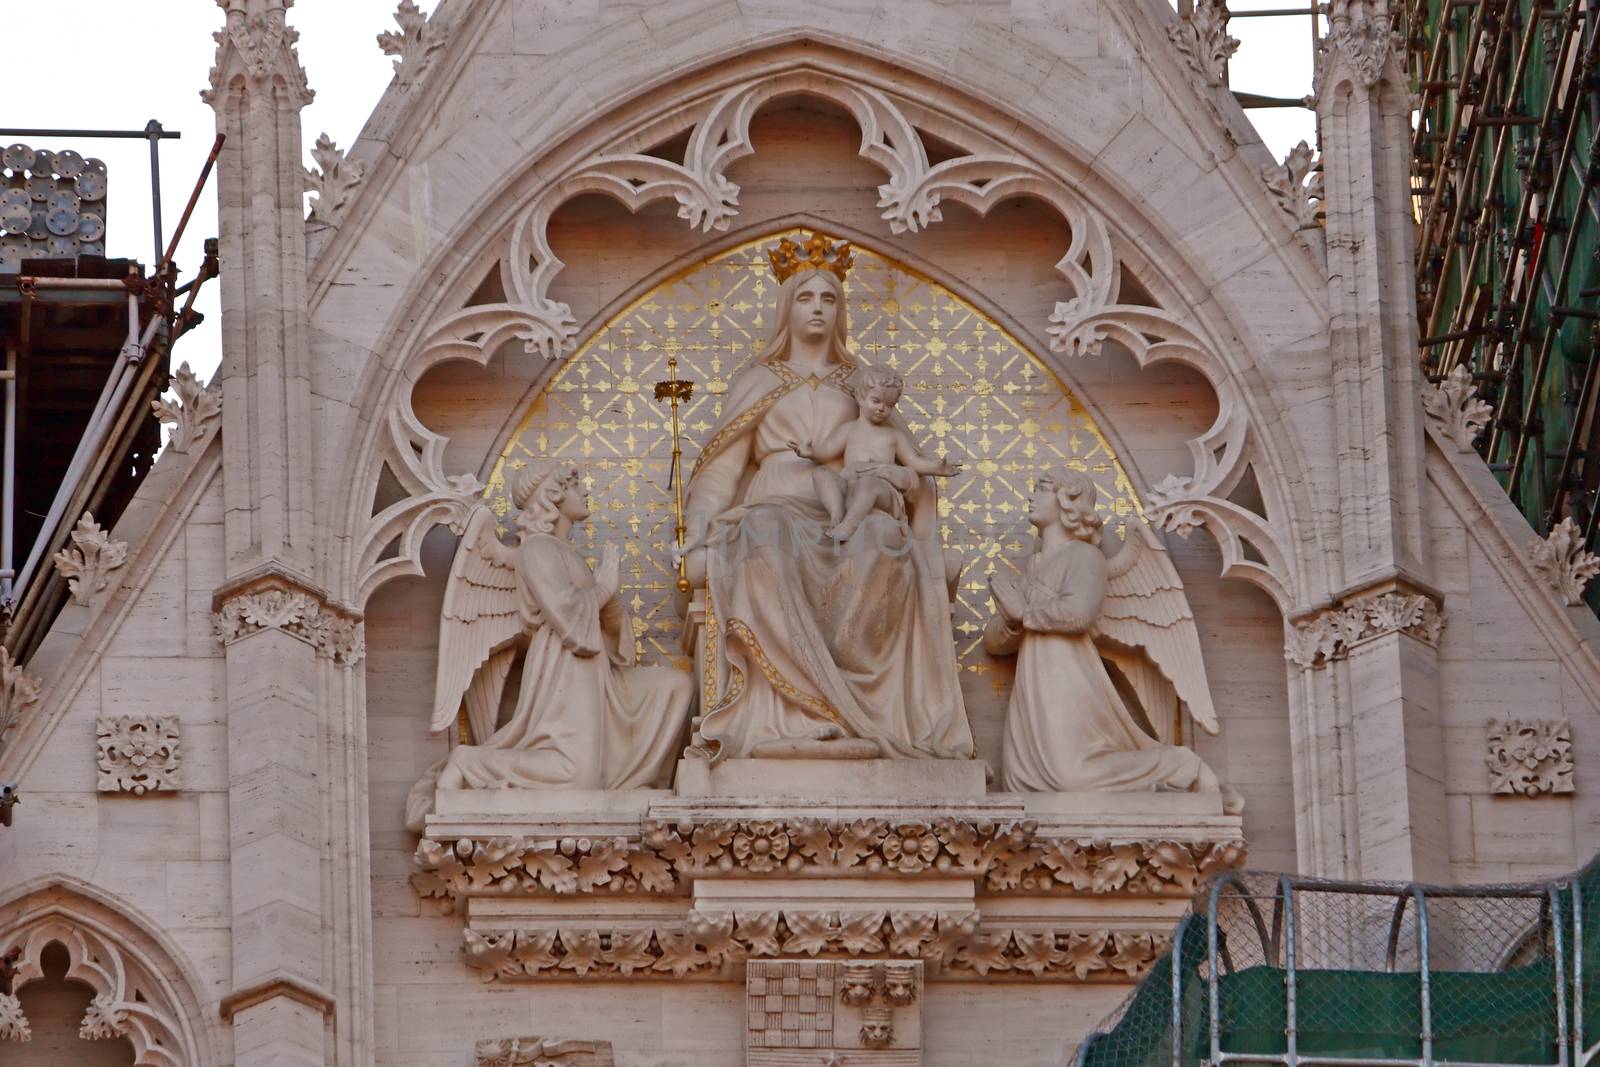 Tympanum of the Cathedral of Assumption of the Blessed Virgin Mary in Zagreb, Croatia decorated with statues of the Virgin Mary, Jesus and angels